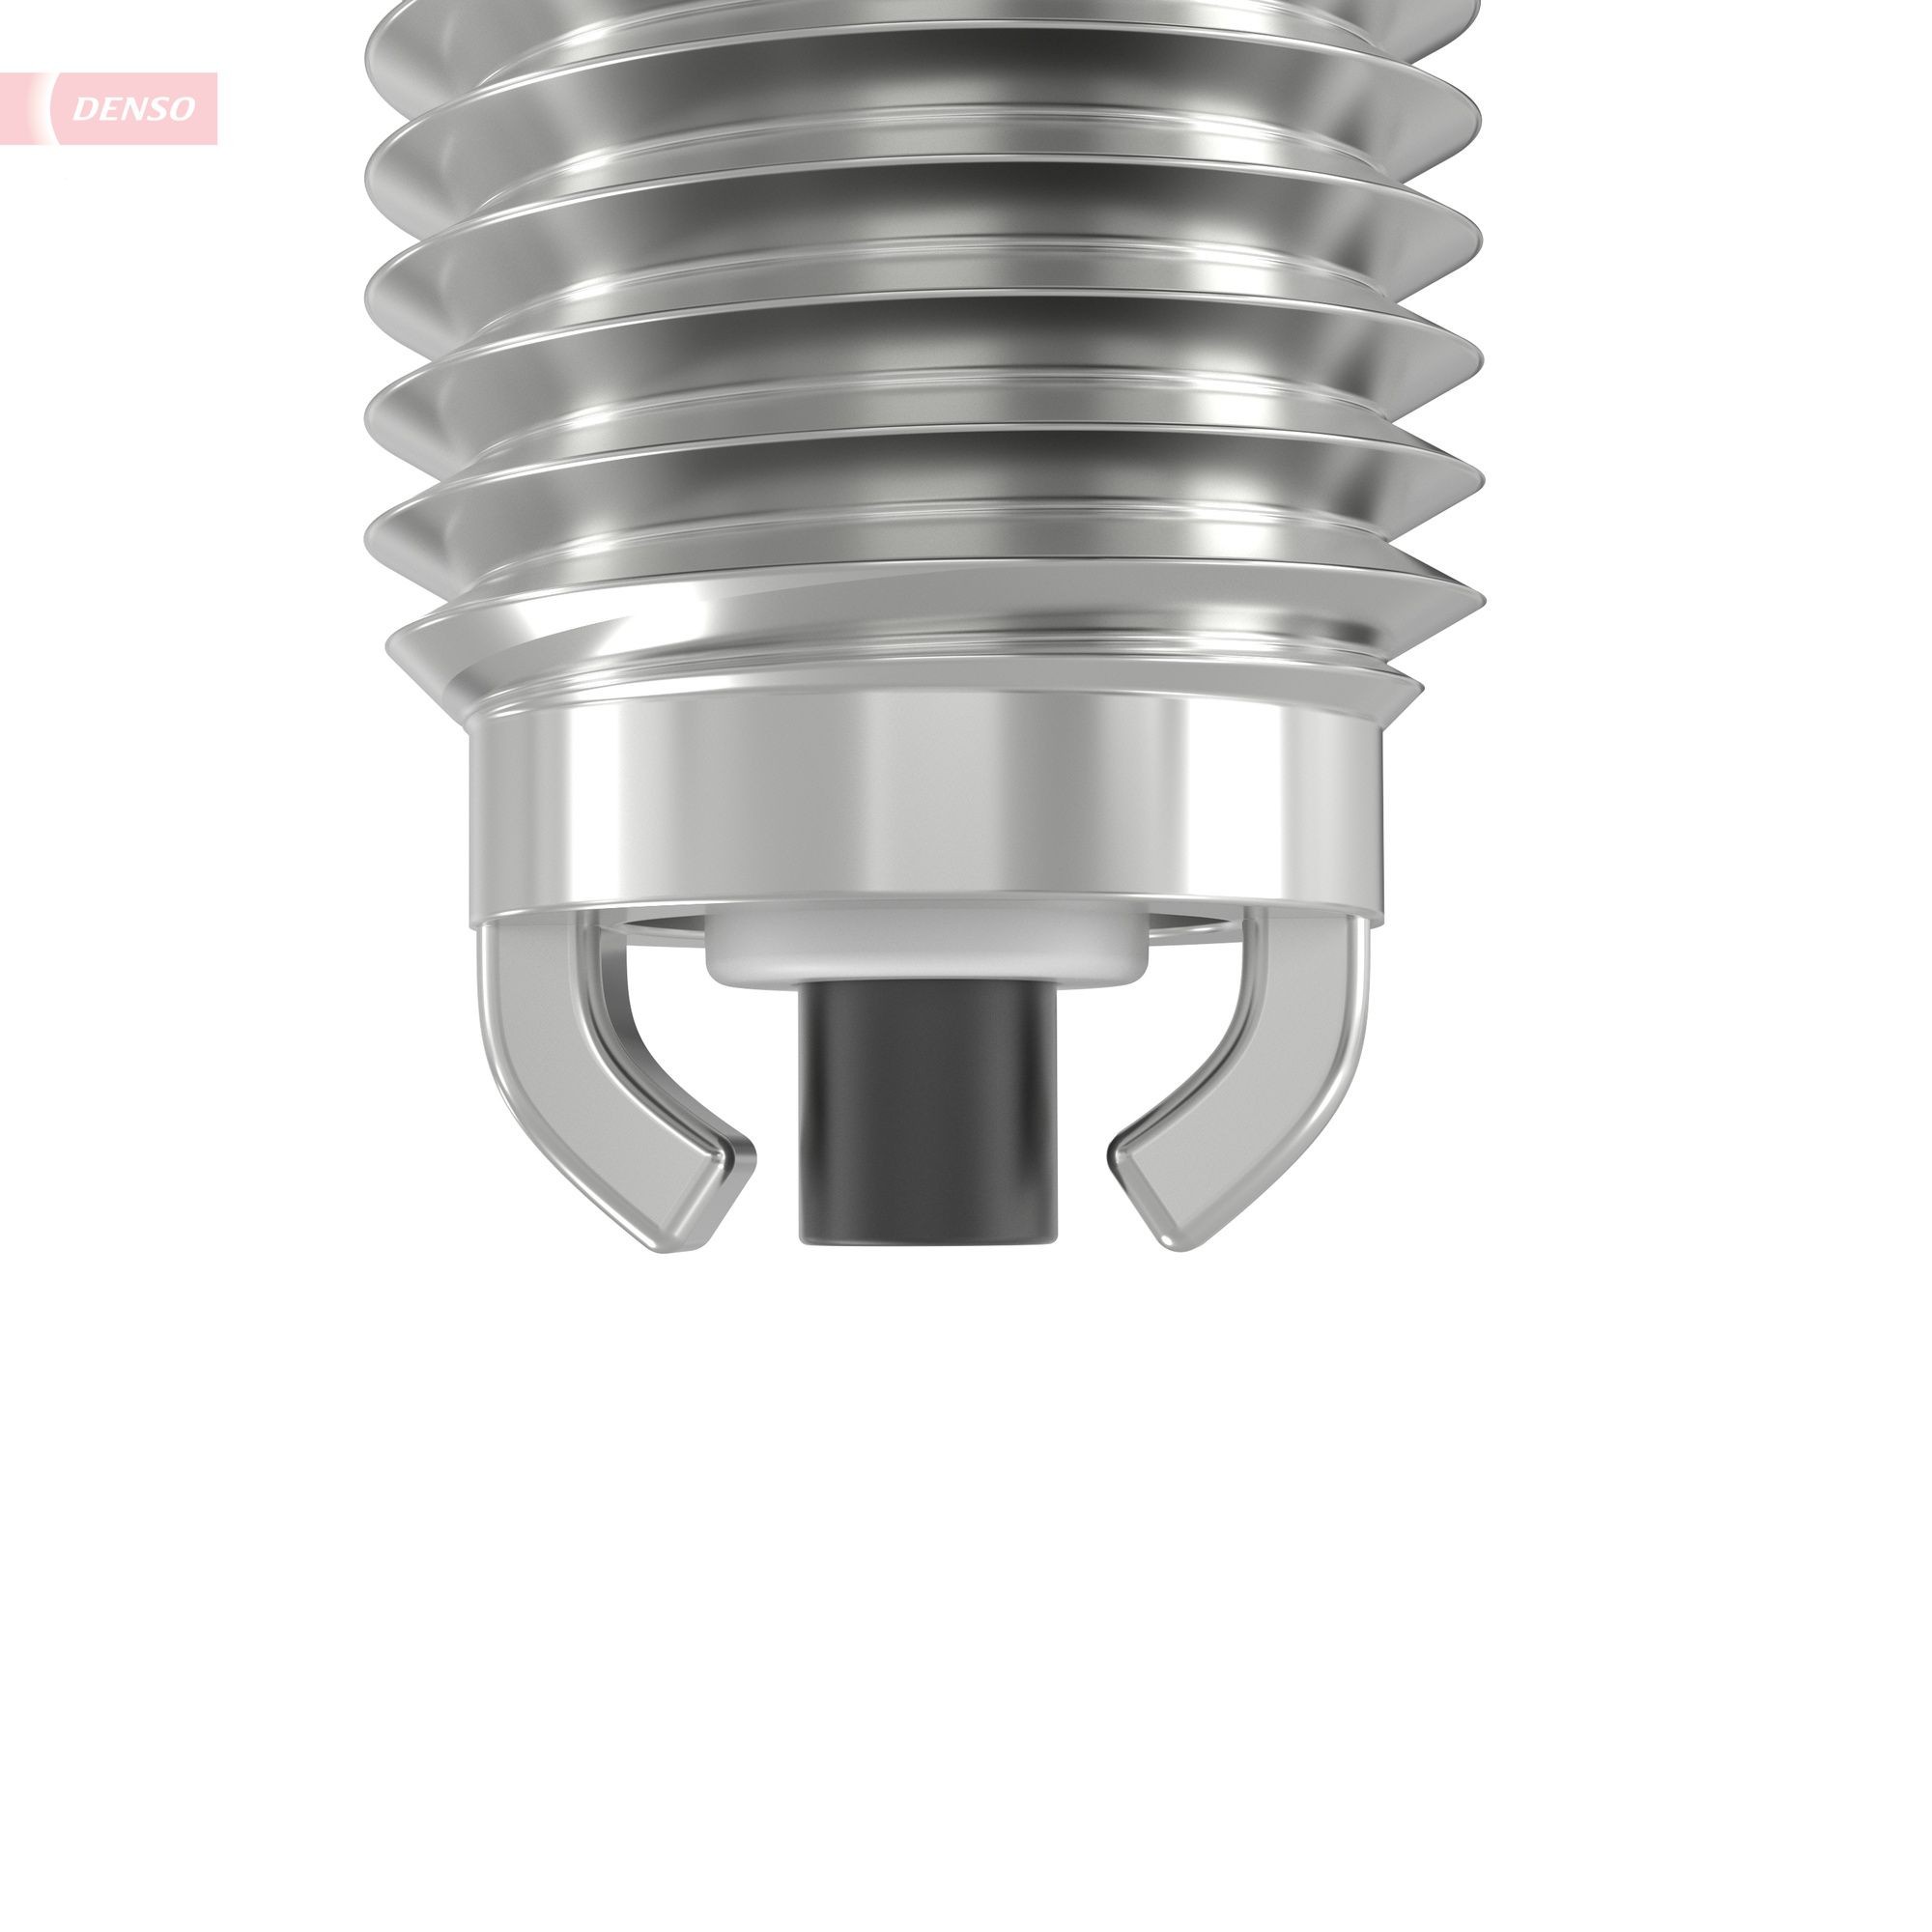 DENSO Spark plugs 4170 buy online